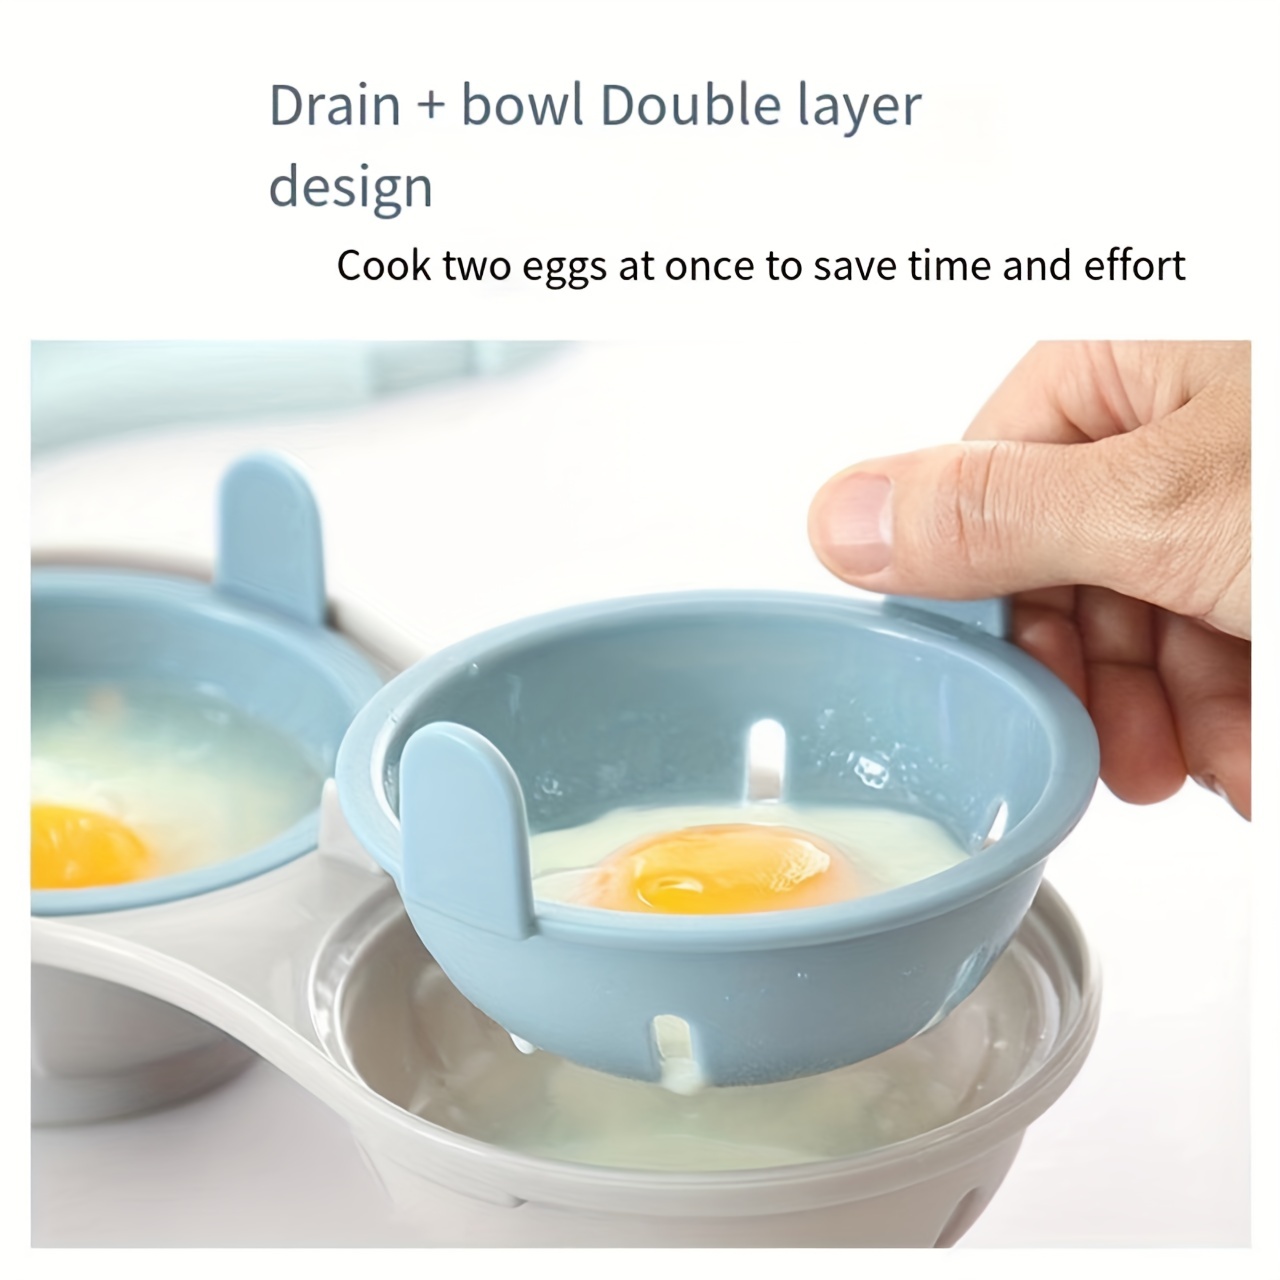 Egg Poacher Microwave Egg Cooker, 2 Cavity Edible Silicone Double Drain  Poached Egg Cups, Microwave Egg Poacher Kitchen Cooking Gadgets